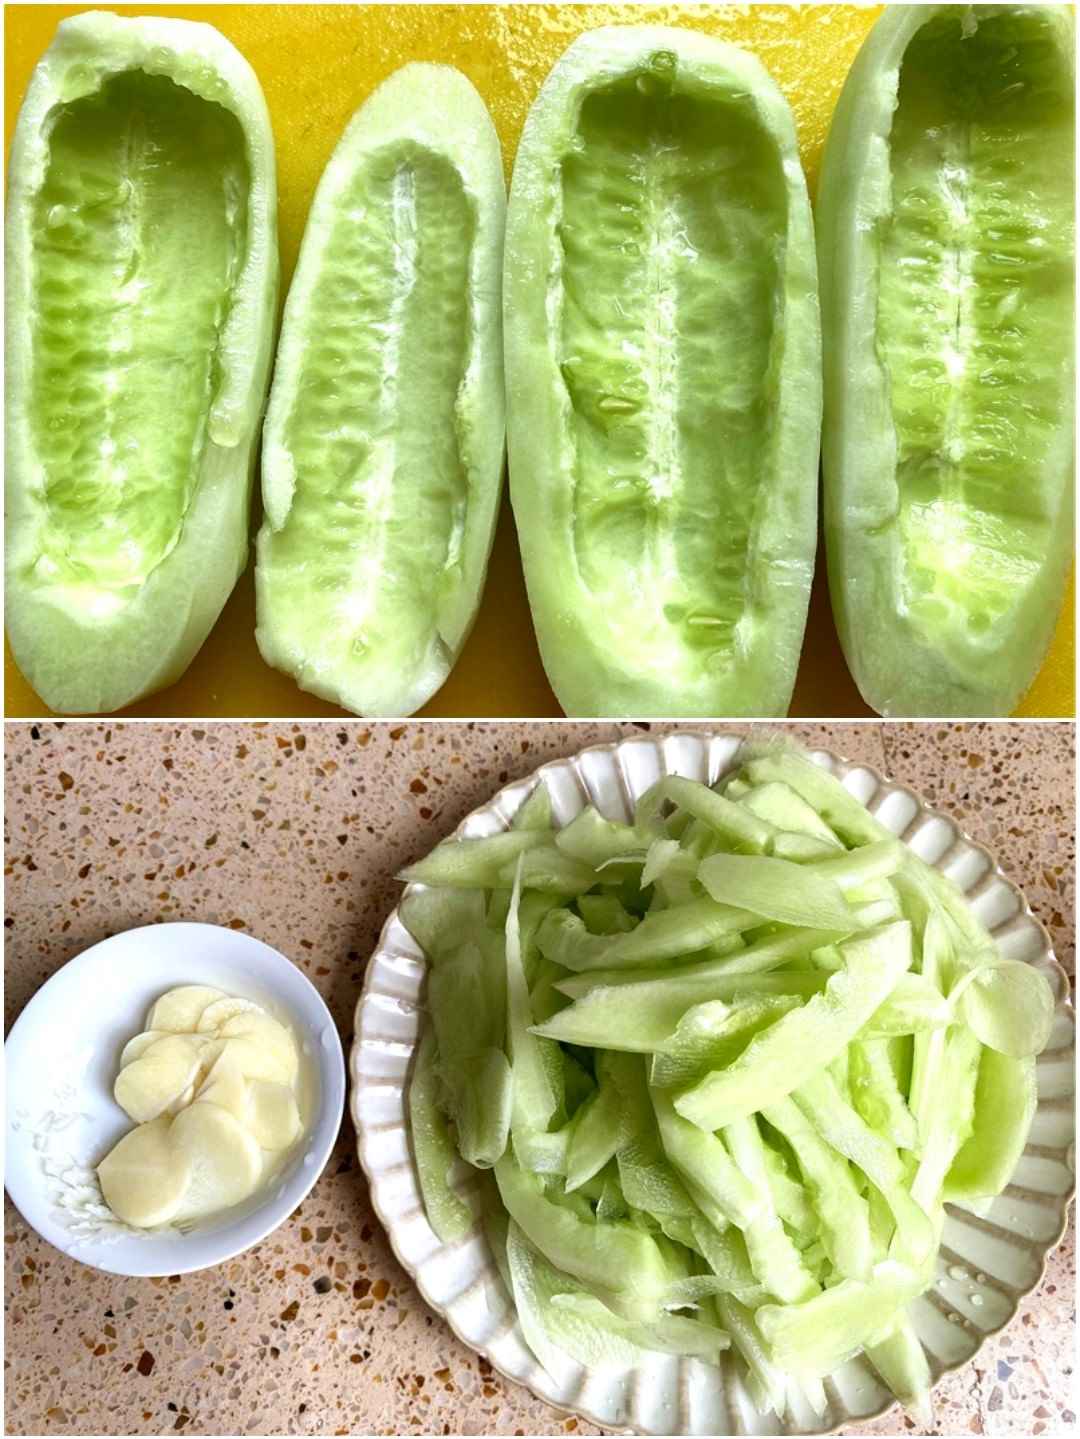 Peel the cucumber and dig out the cucumber seeds